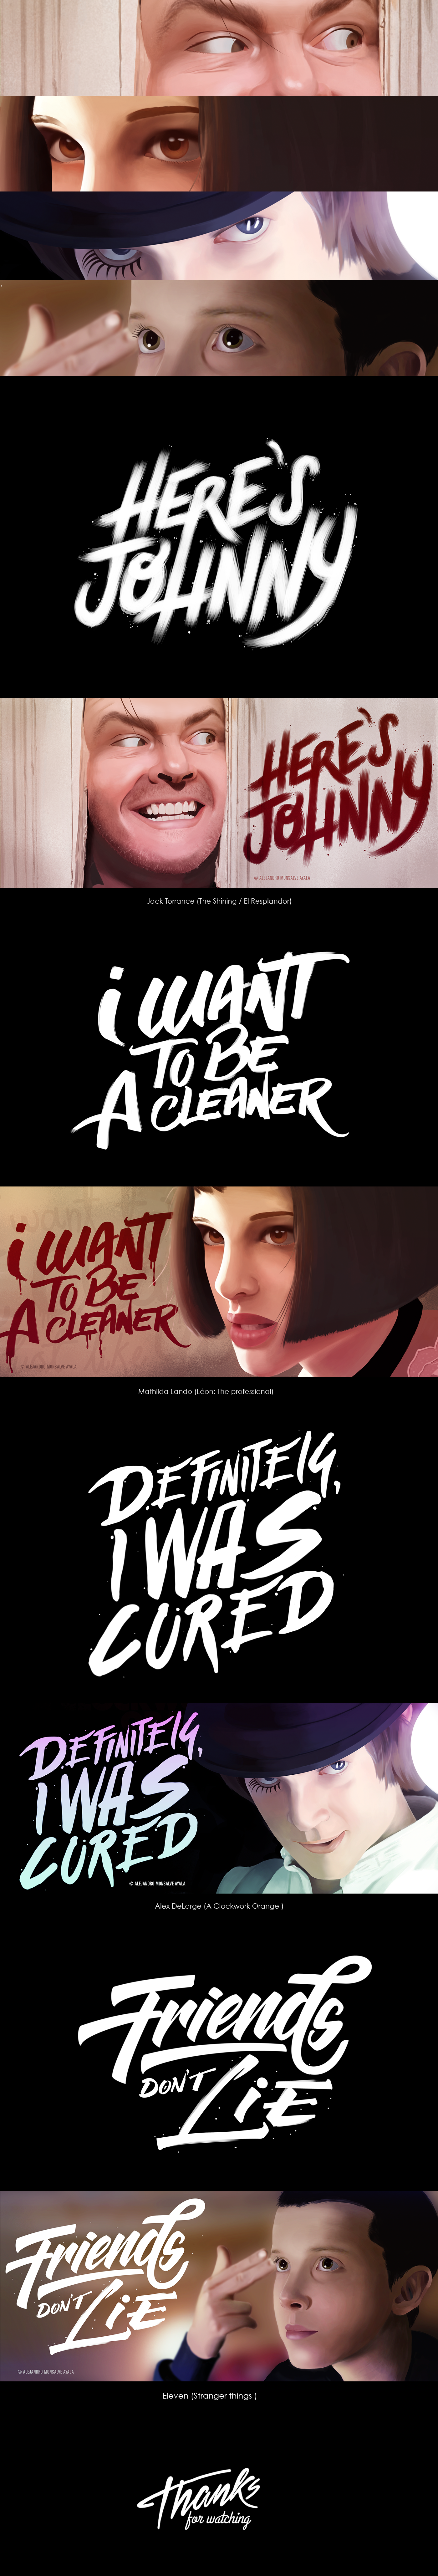 portrait lettering type Movies tv once eleven the shining Leon mathilda